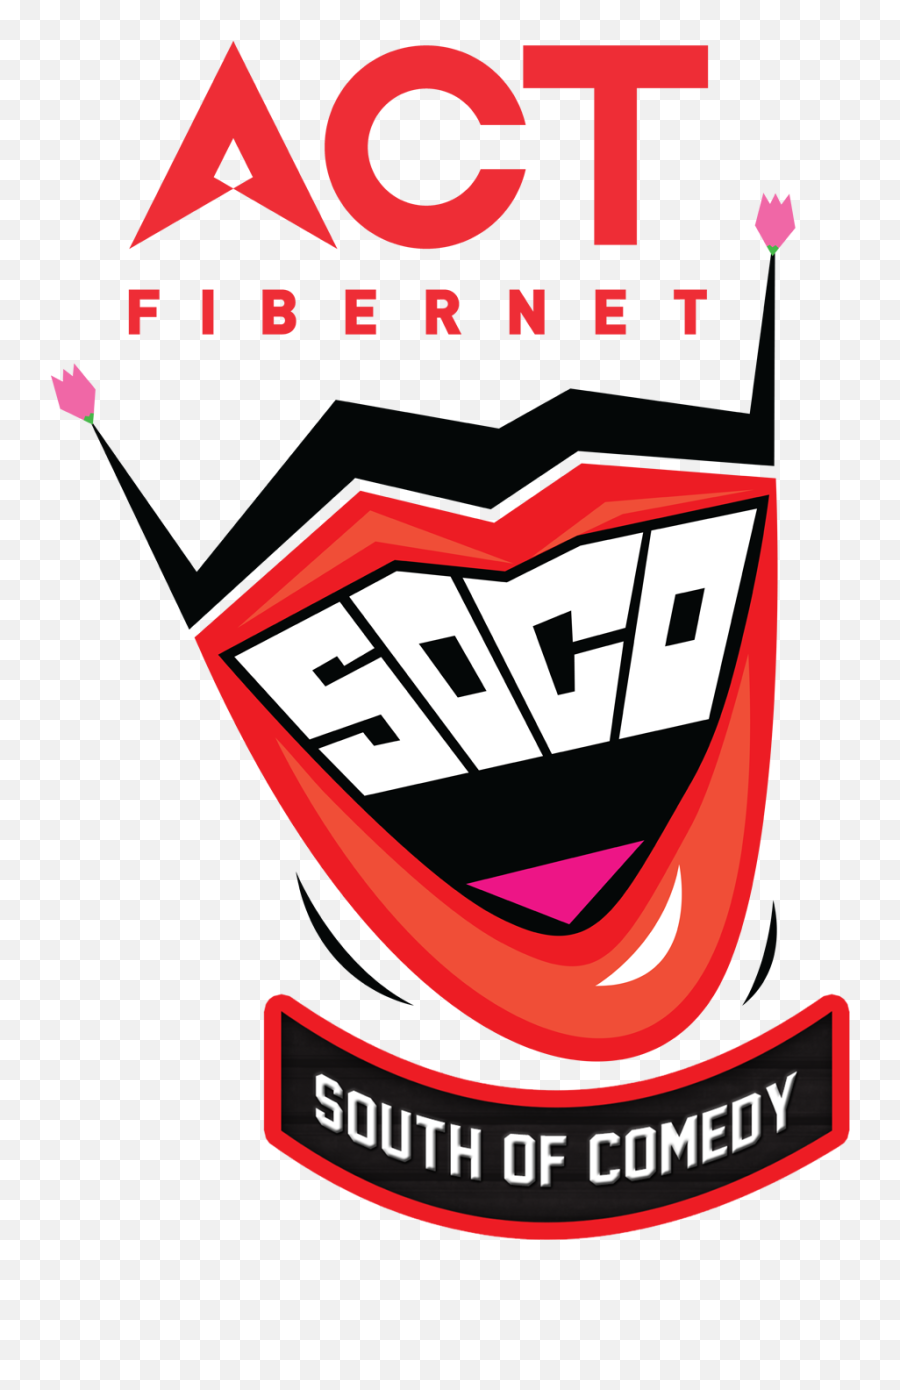 Silicon Village Act Fibernet Ties Up With Evam To Launch Emoji,Comed Logo